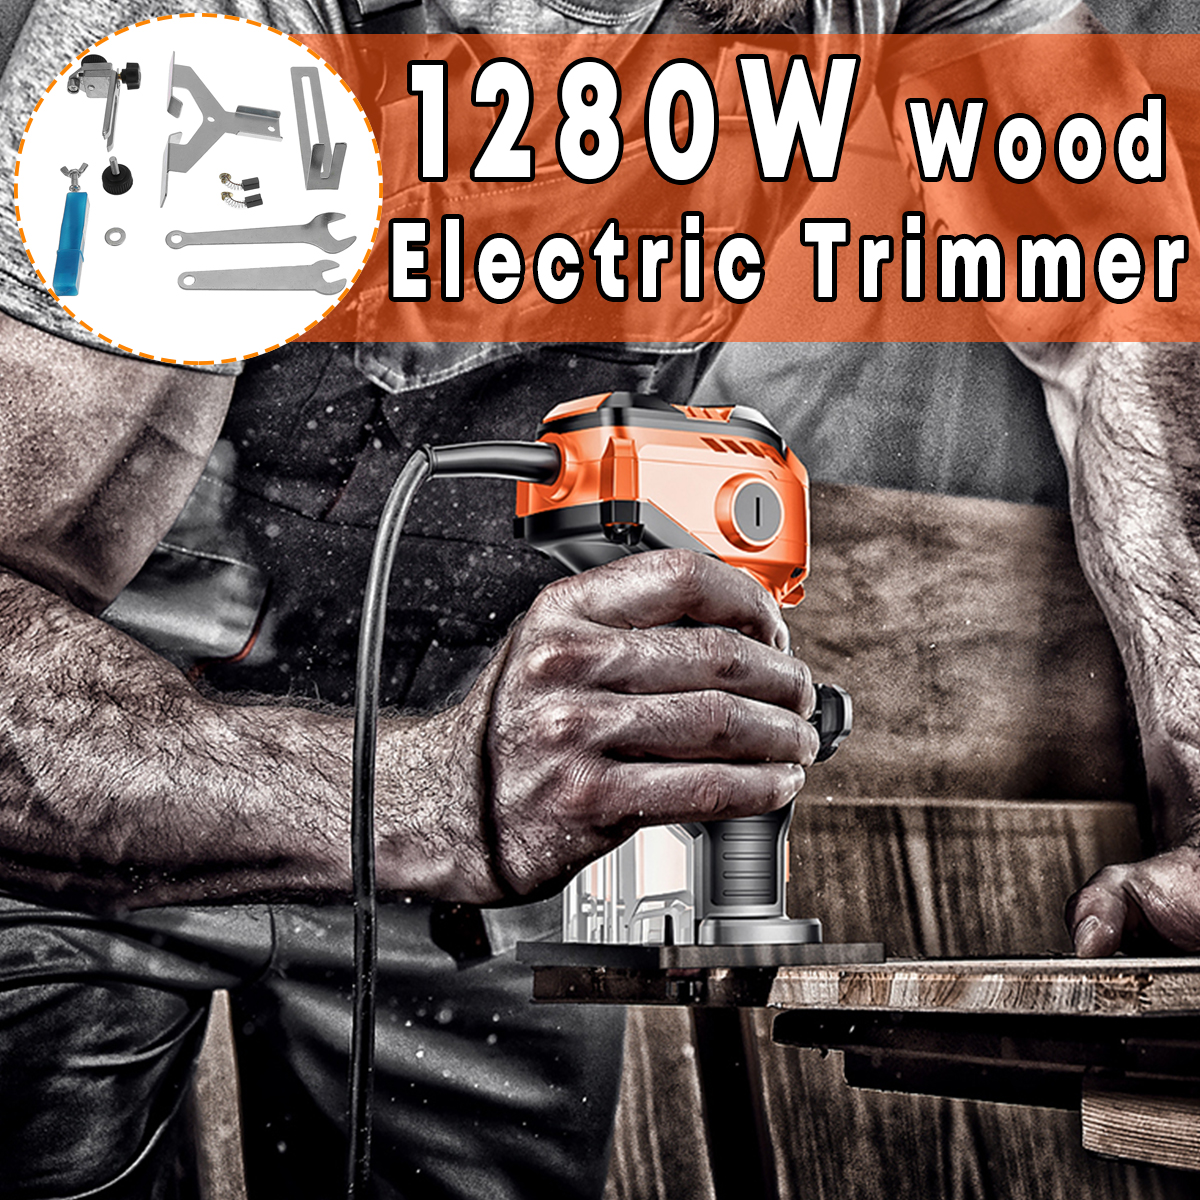 1280W-35000rmin-Electric-Hand-Trimmer-Wood-Laminator-Router-Edge-Joiners-Set-1541348-2